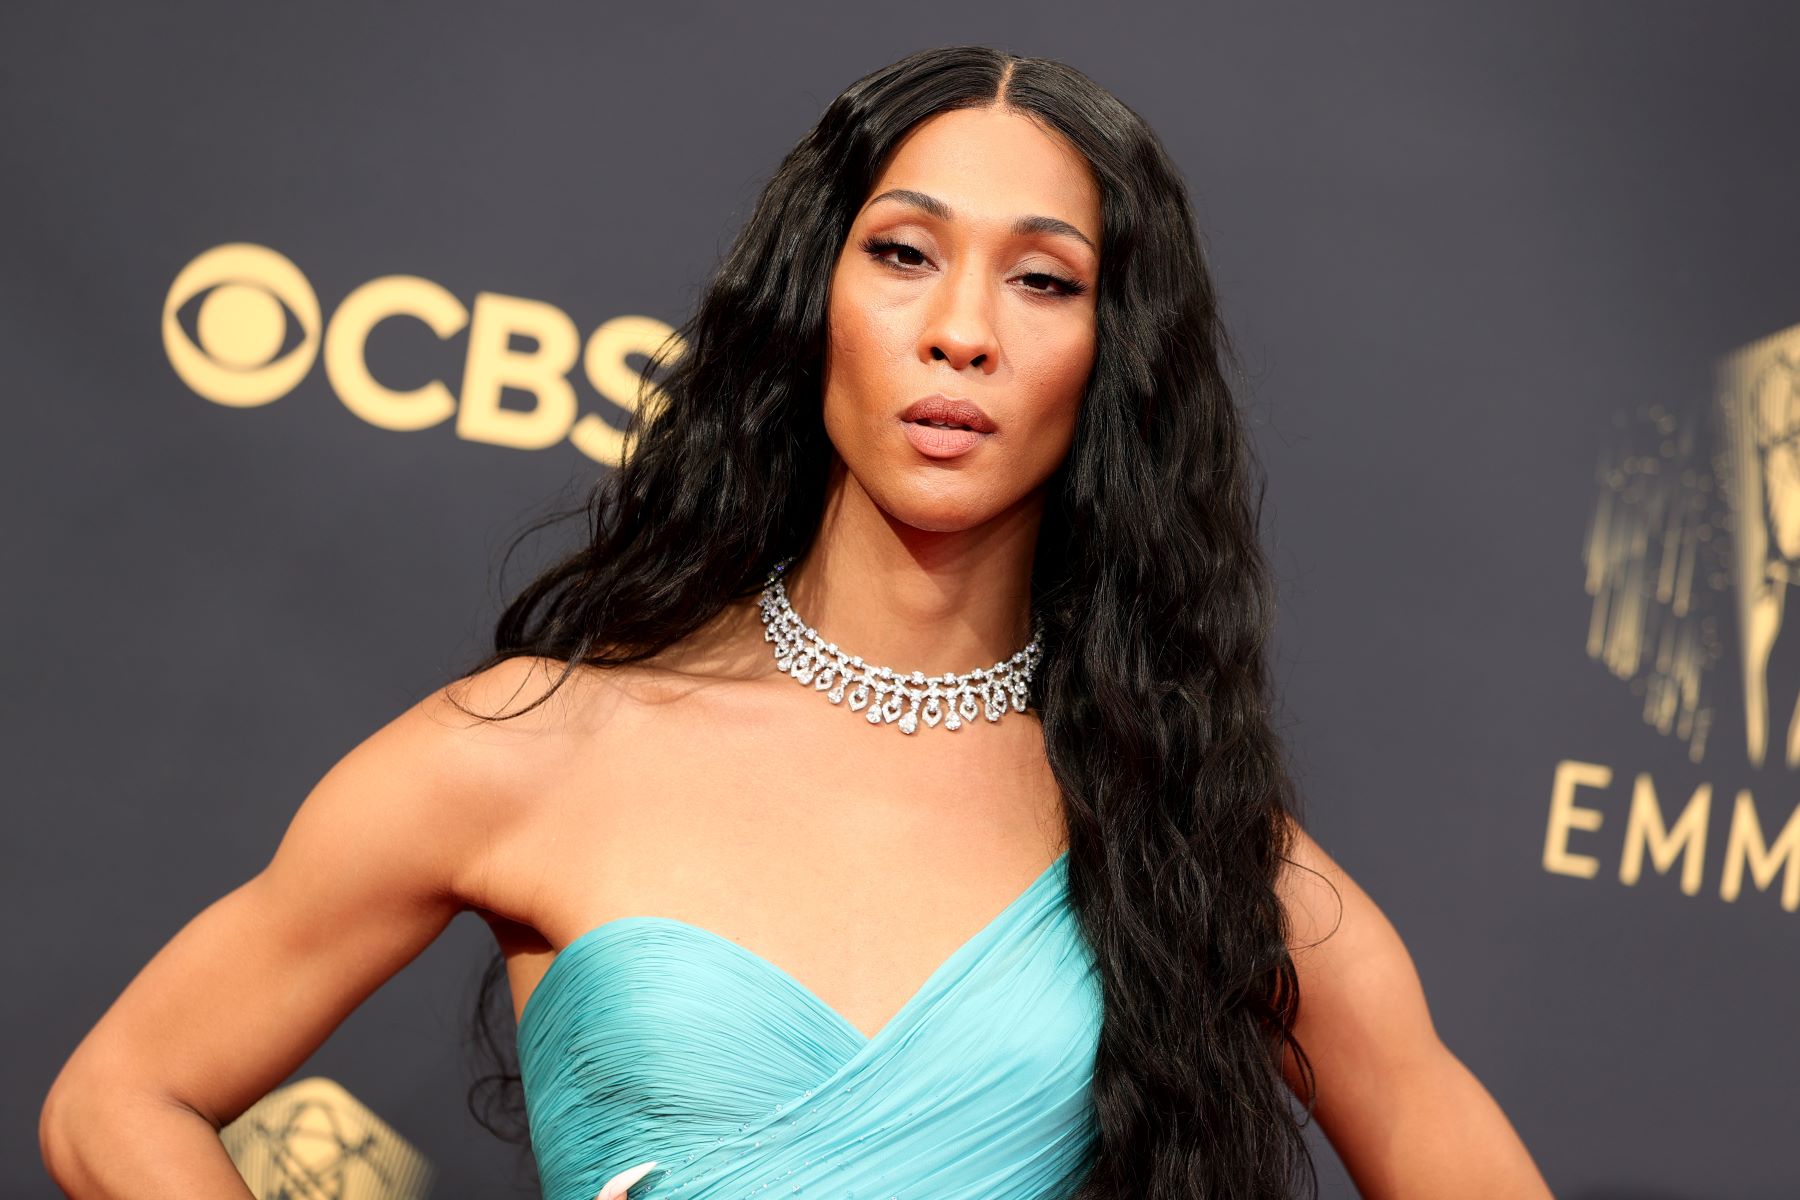 ‘Pose’ Season 3: Mj Rodriguez (Blanca) Said She ‘Was Crying in the Bathroom’ When Filming Wrapped